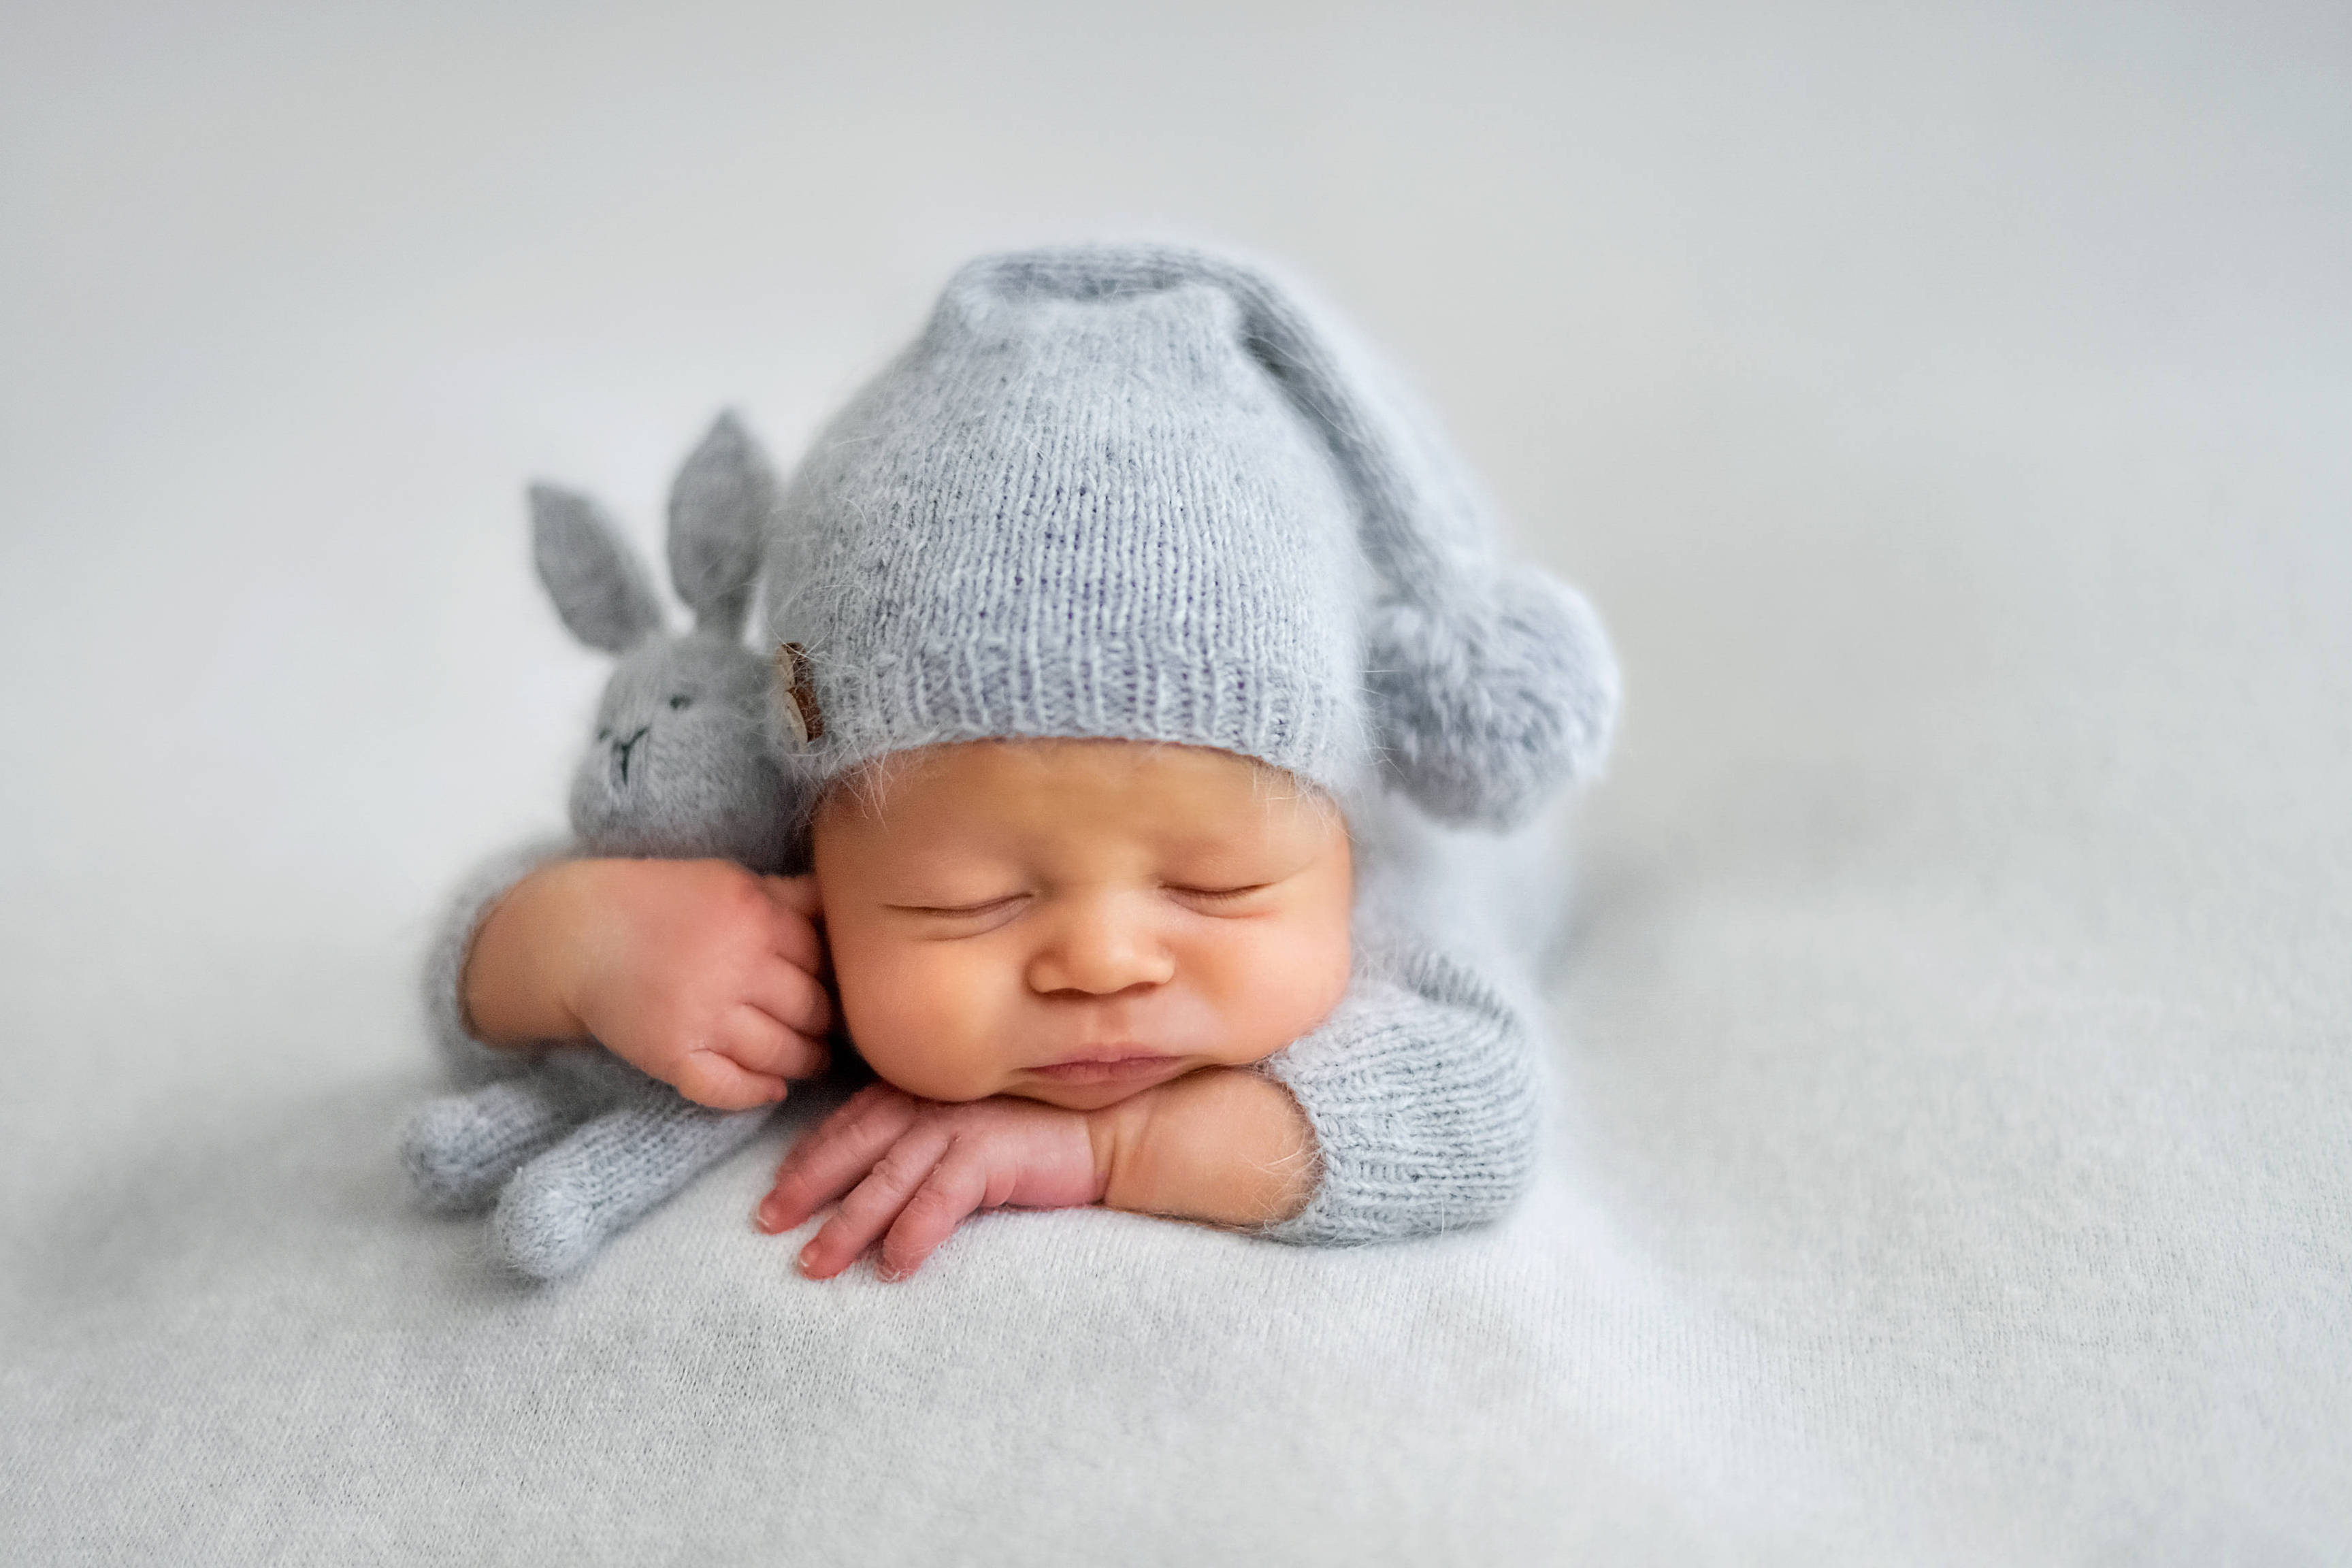 Sleeping newborn boy in the first days of life on white background